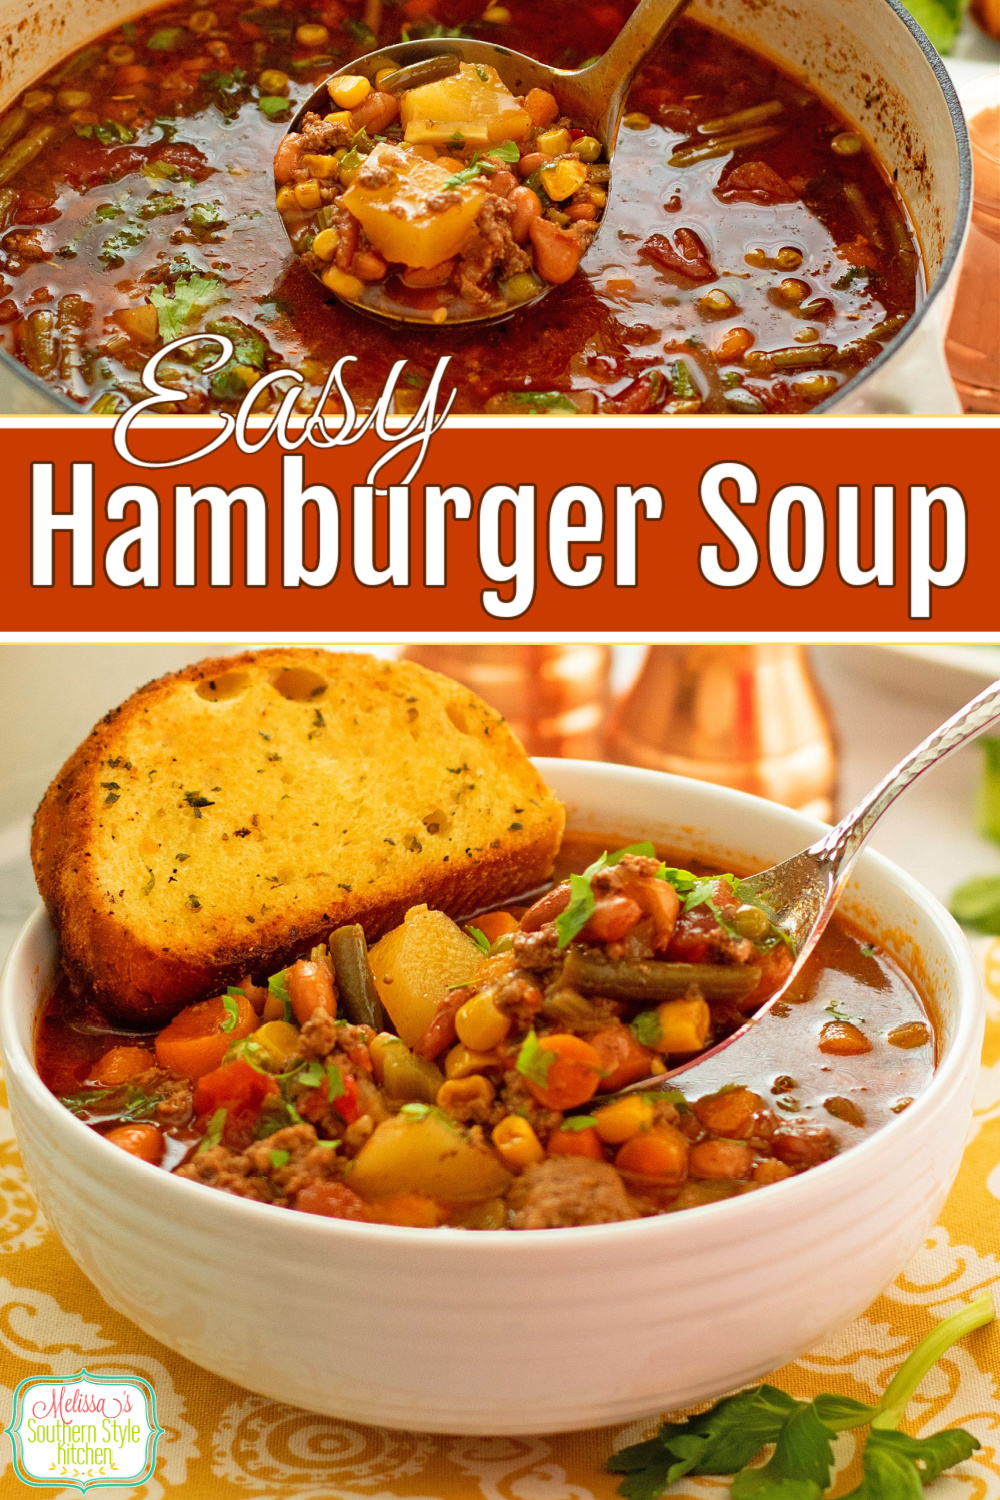 This homestyle Hamburger Soup Recipe creates a family pleasing meal using simple everyday ingredients #hamburgerrecipes #hamburgersoup #souprecipes #easygroundbeefrecipes #soups #besthamburgersoup #hamburgers #vegetablesoup via @melissasssk